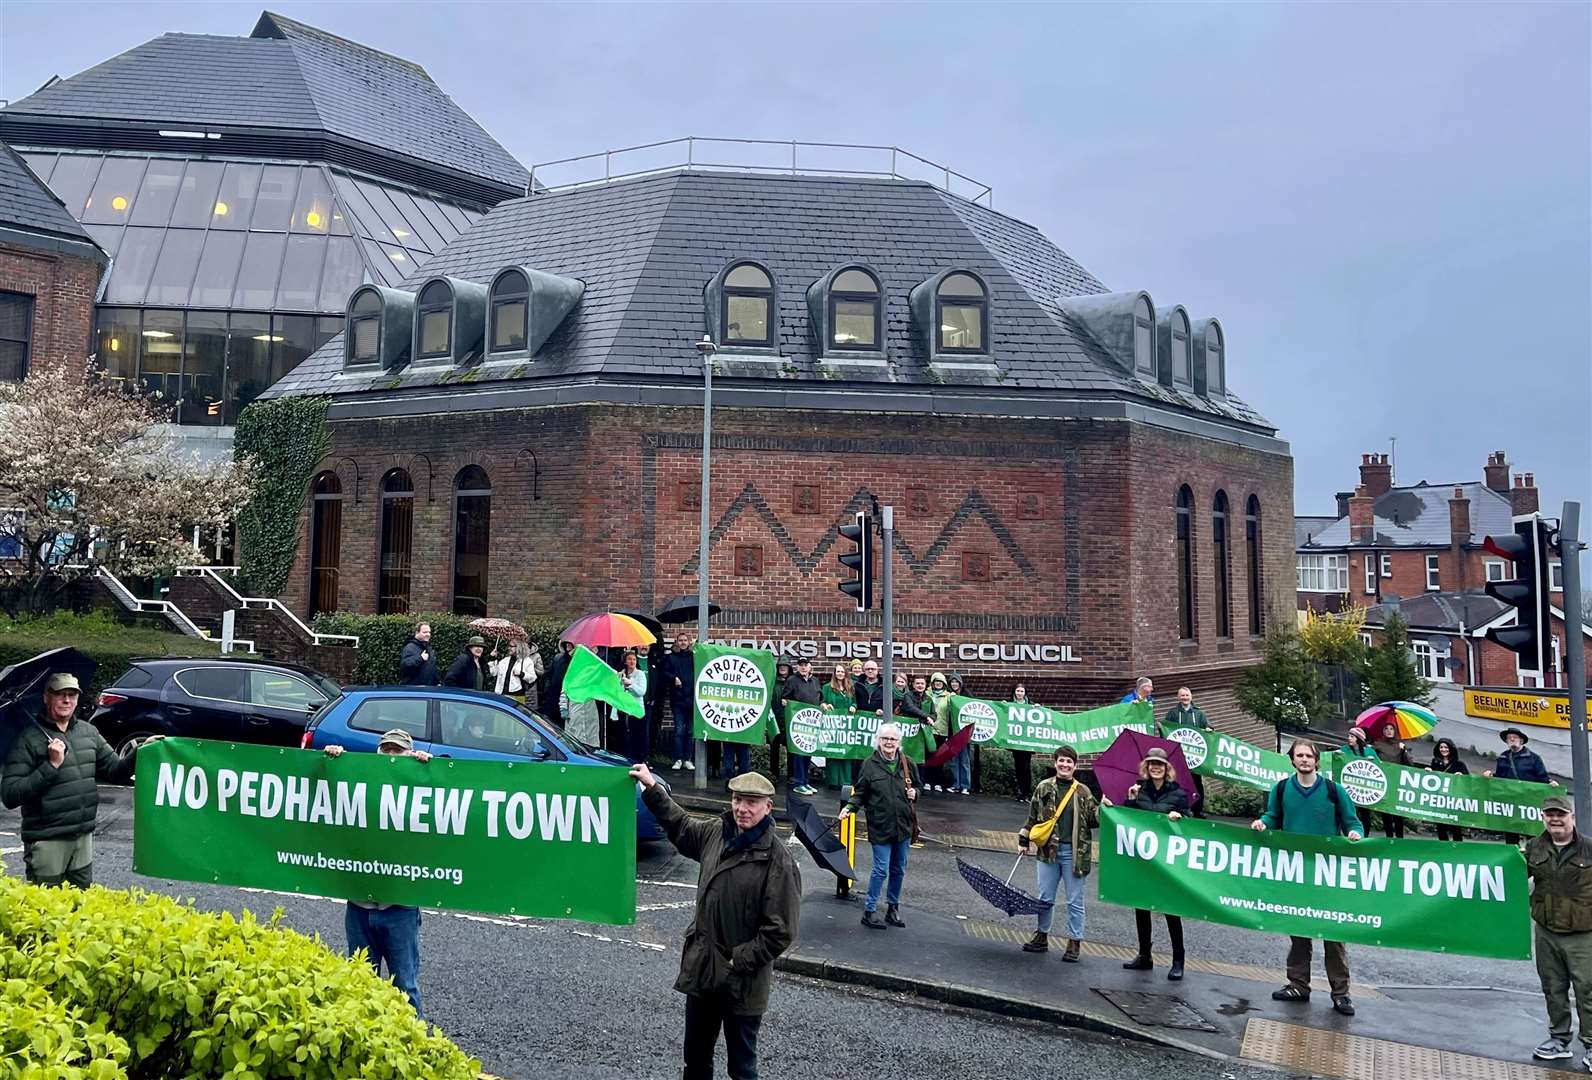 More than 50 villagers braved the rain to join a protest outside Sevenoaks council over plans to build a 2,500 home garden village at Pedham Place golf course. Photo: Protect The Green Belt Together